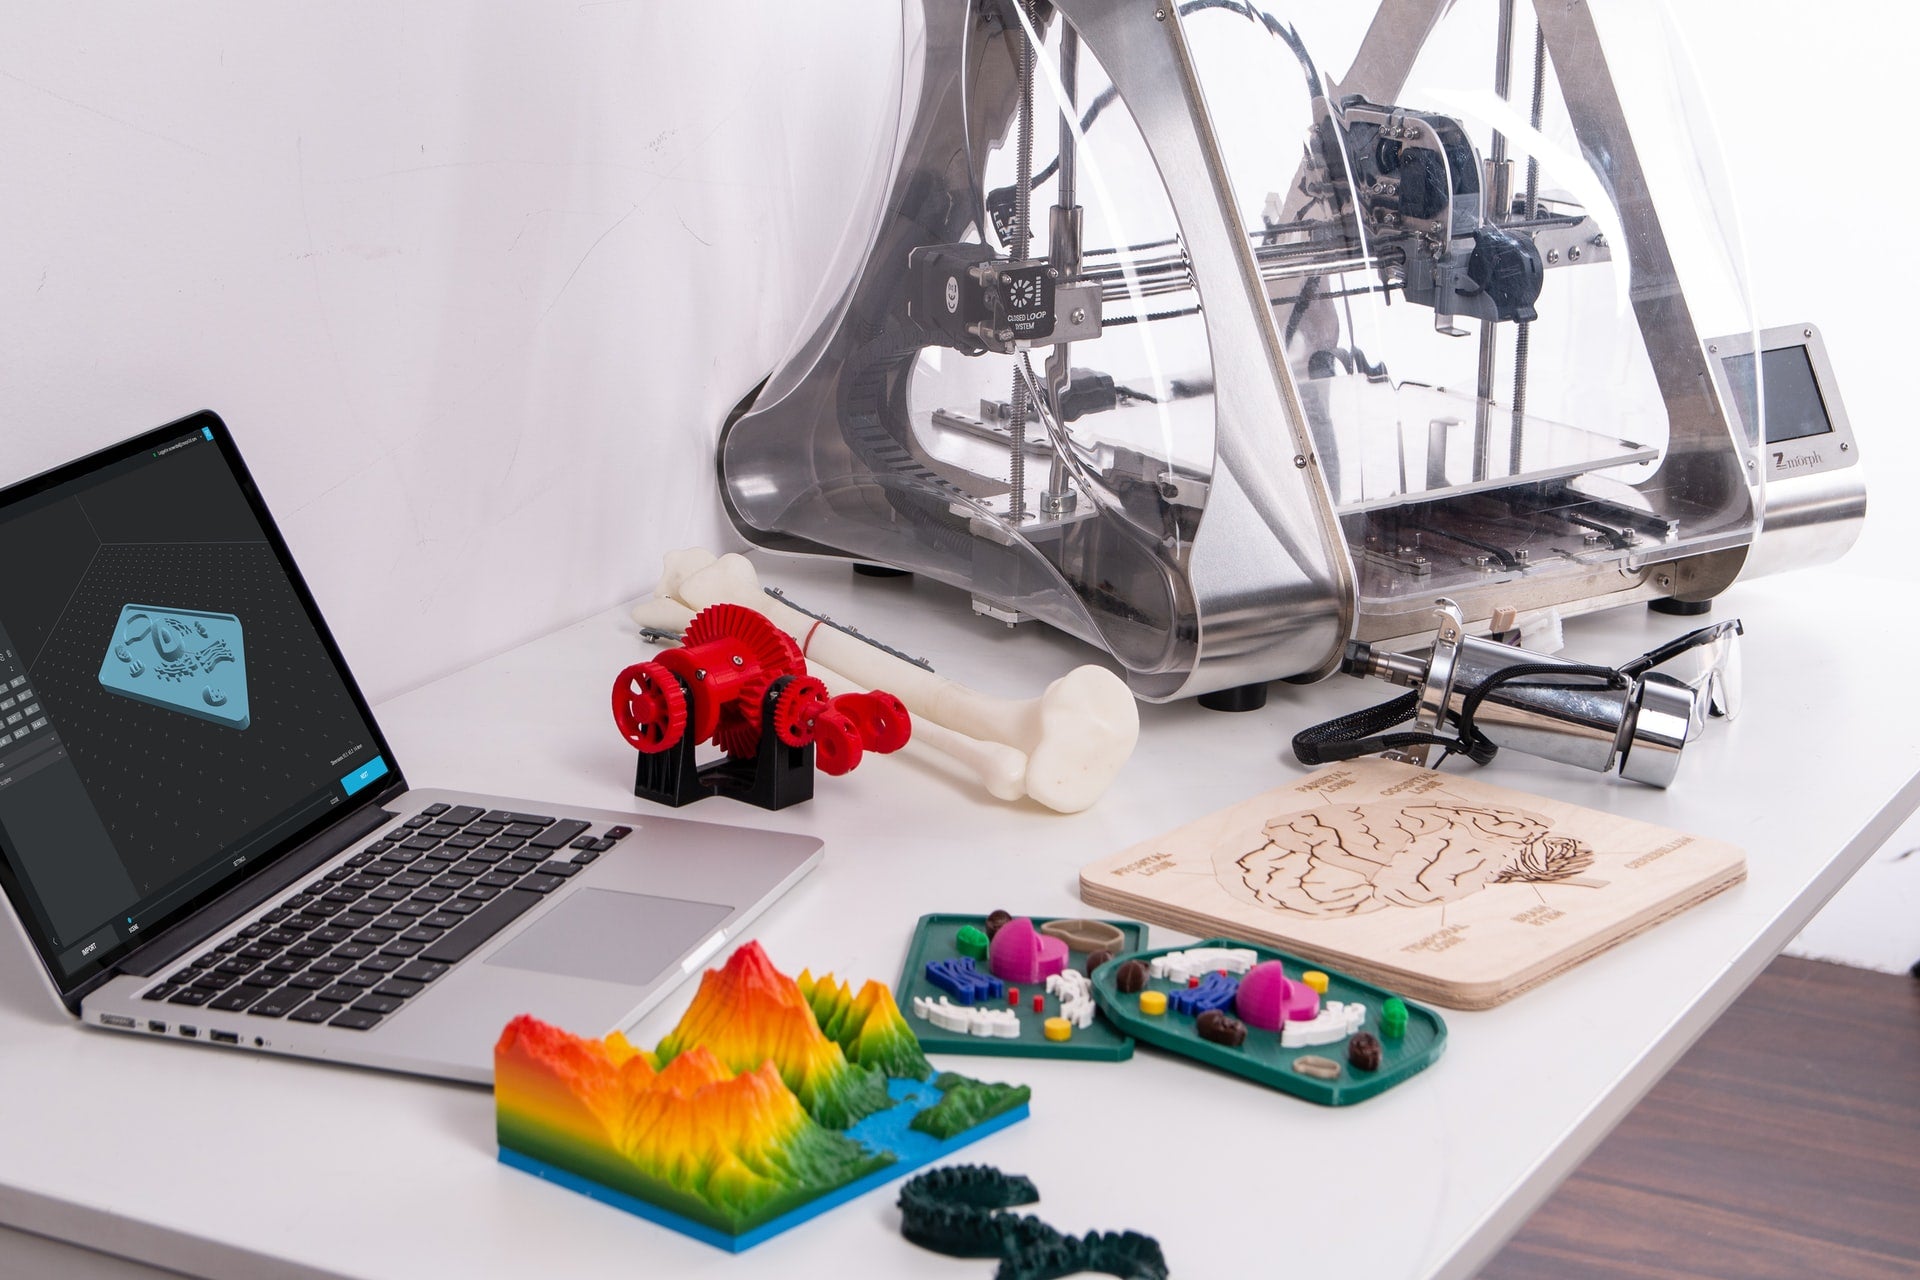 4 Ways to Improve Your 3D Printing Skills over the Holidays